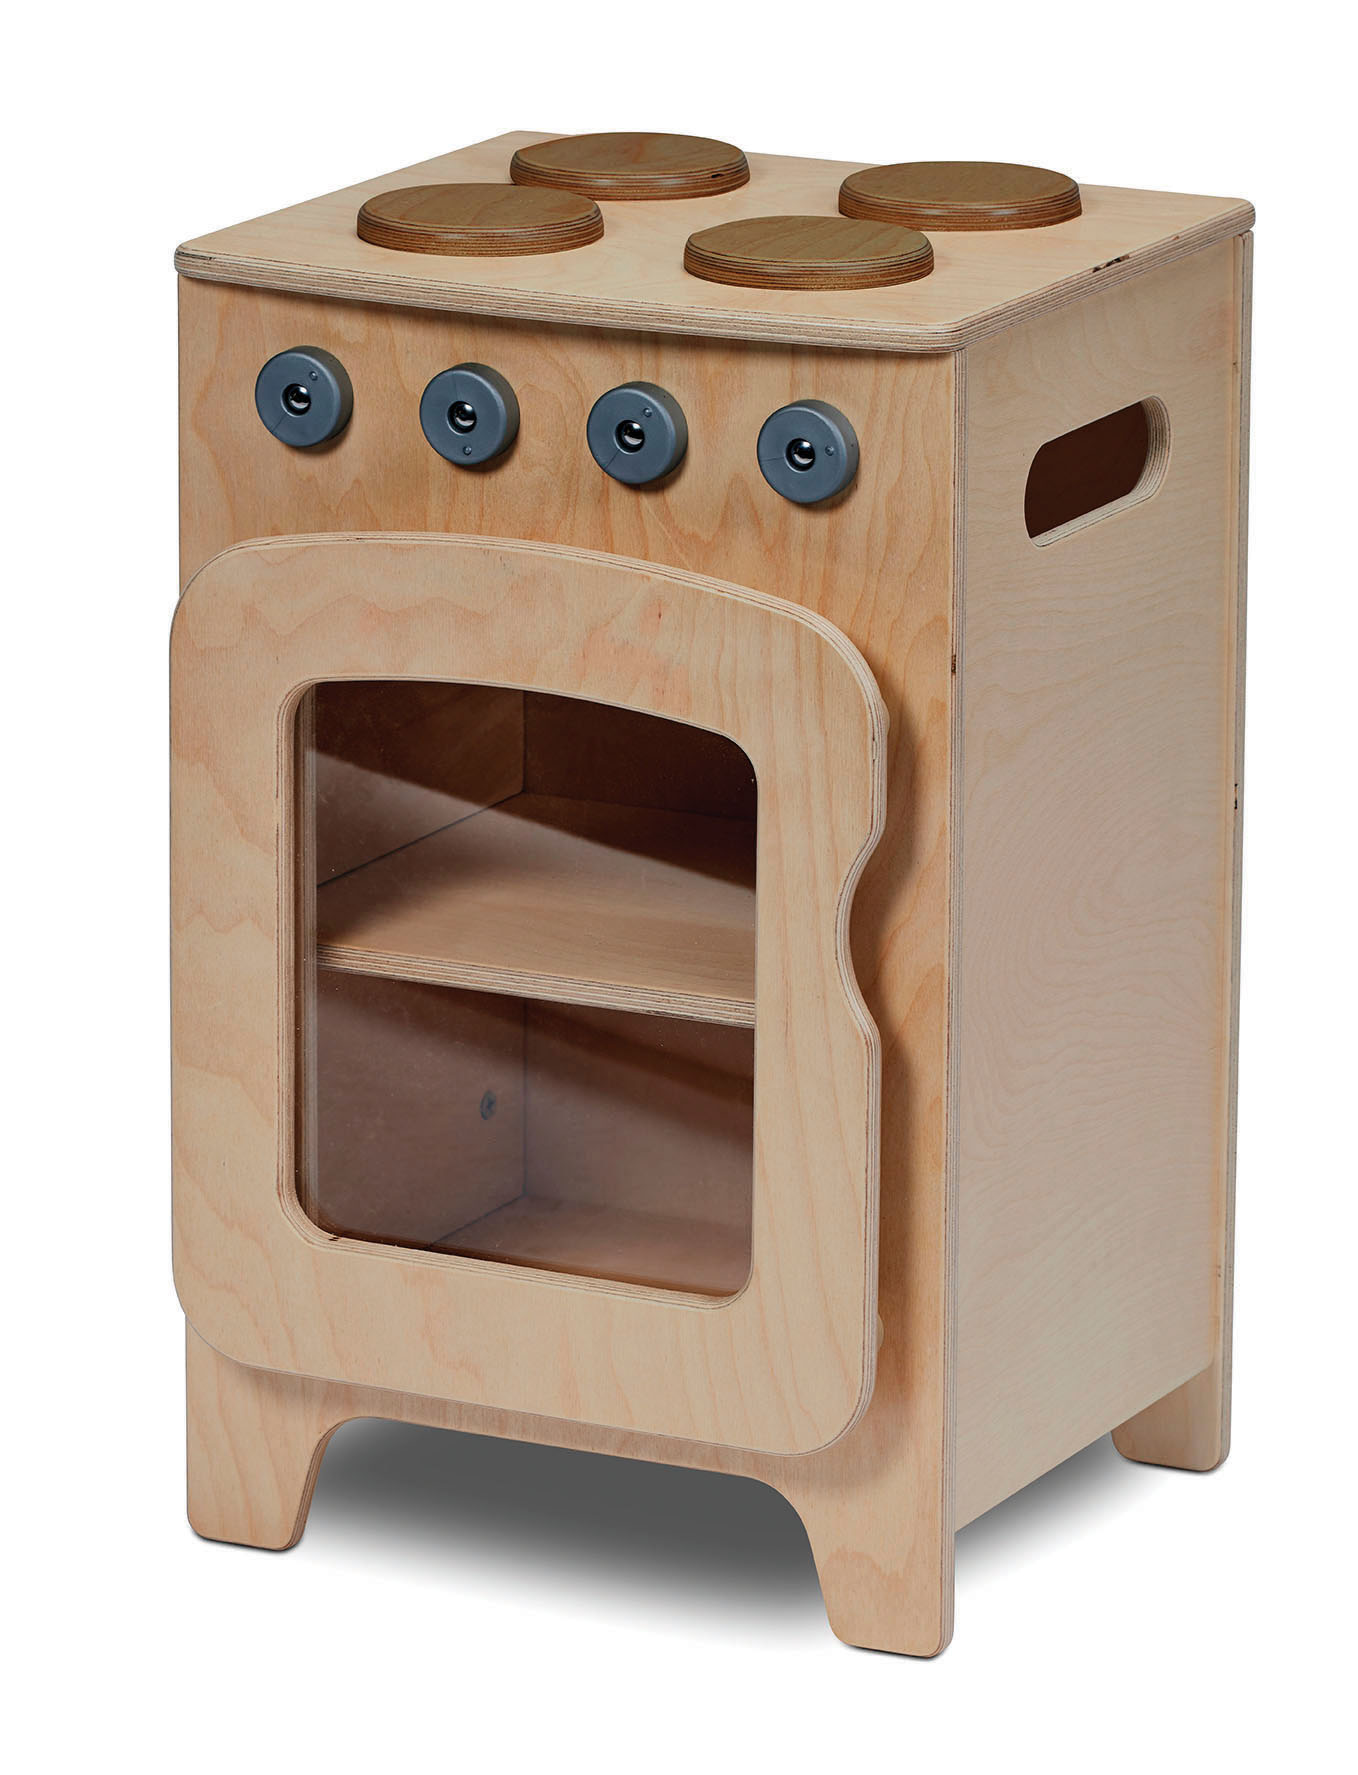 PT840-Millhouse-Early-Years-Furniture-Natural-Cooker_Main_RGB.jpg